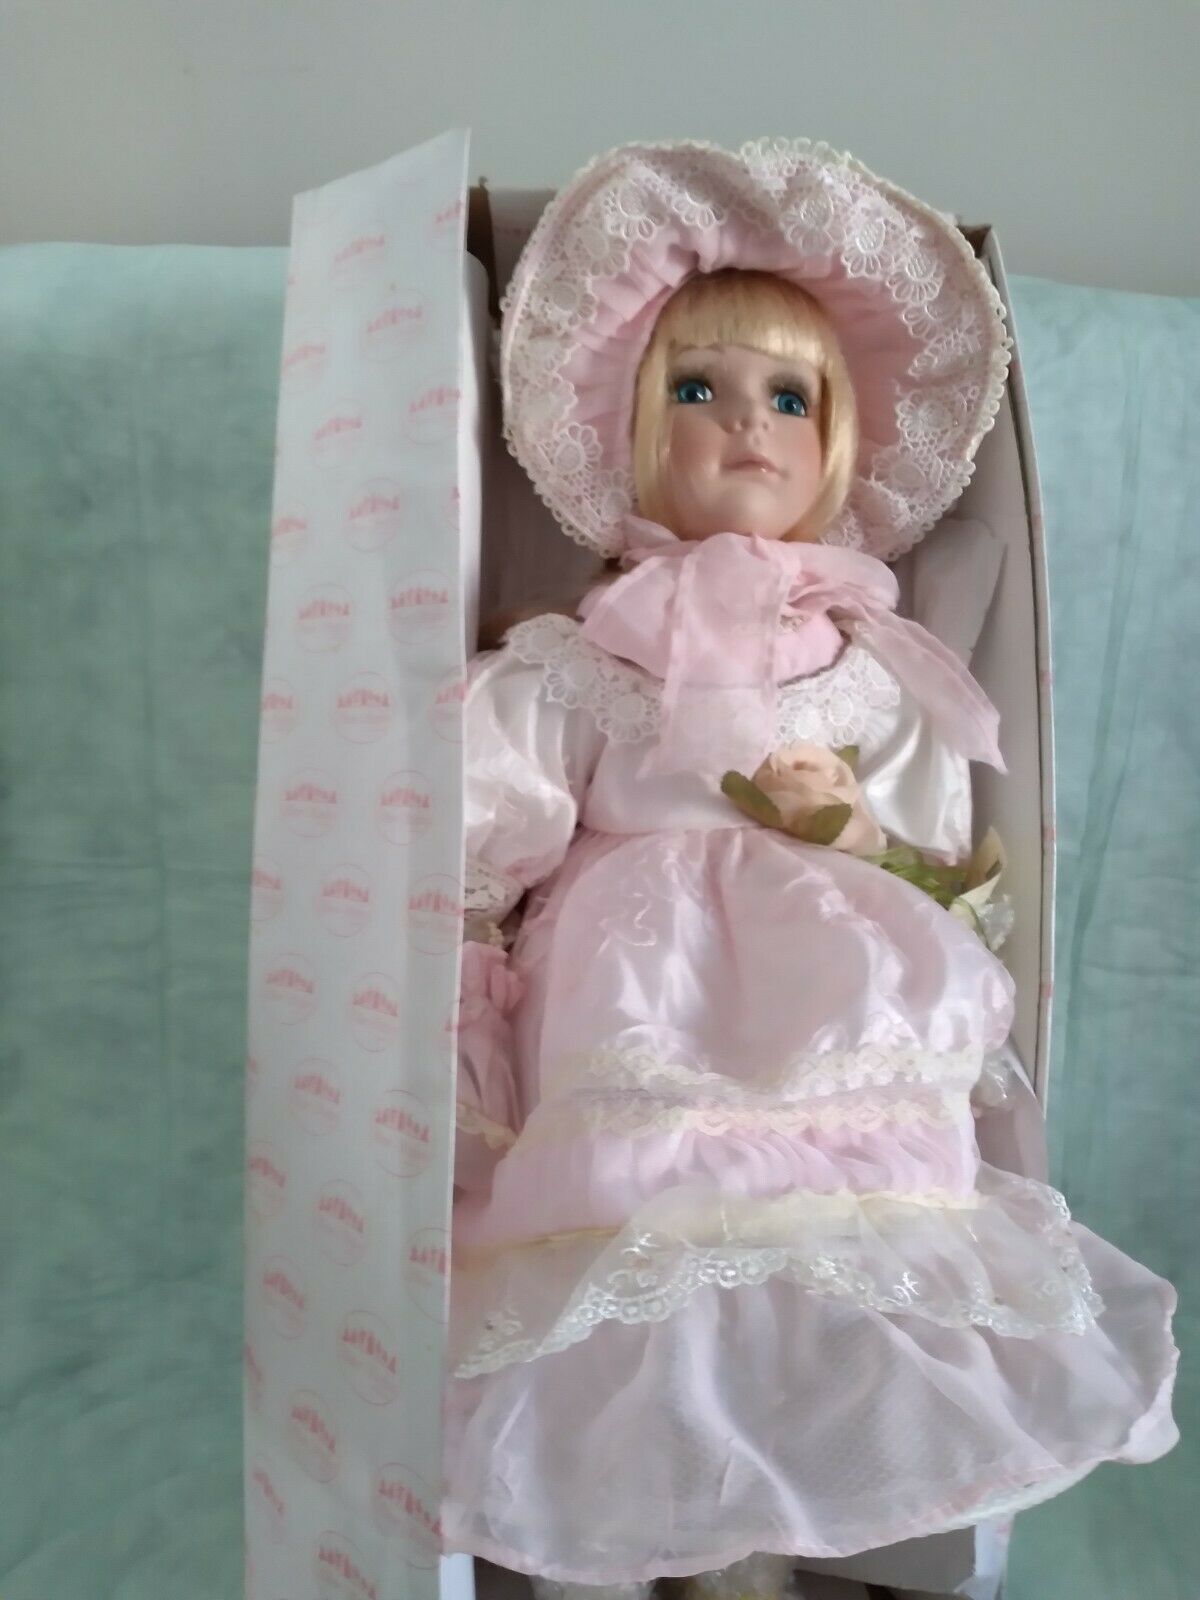 Show Stoppers Porcelain Doll New In Box Pink Dress W/hat Victorian H-22" Vintage